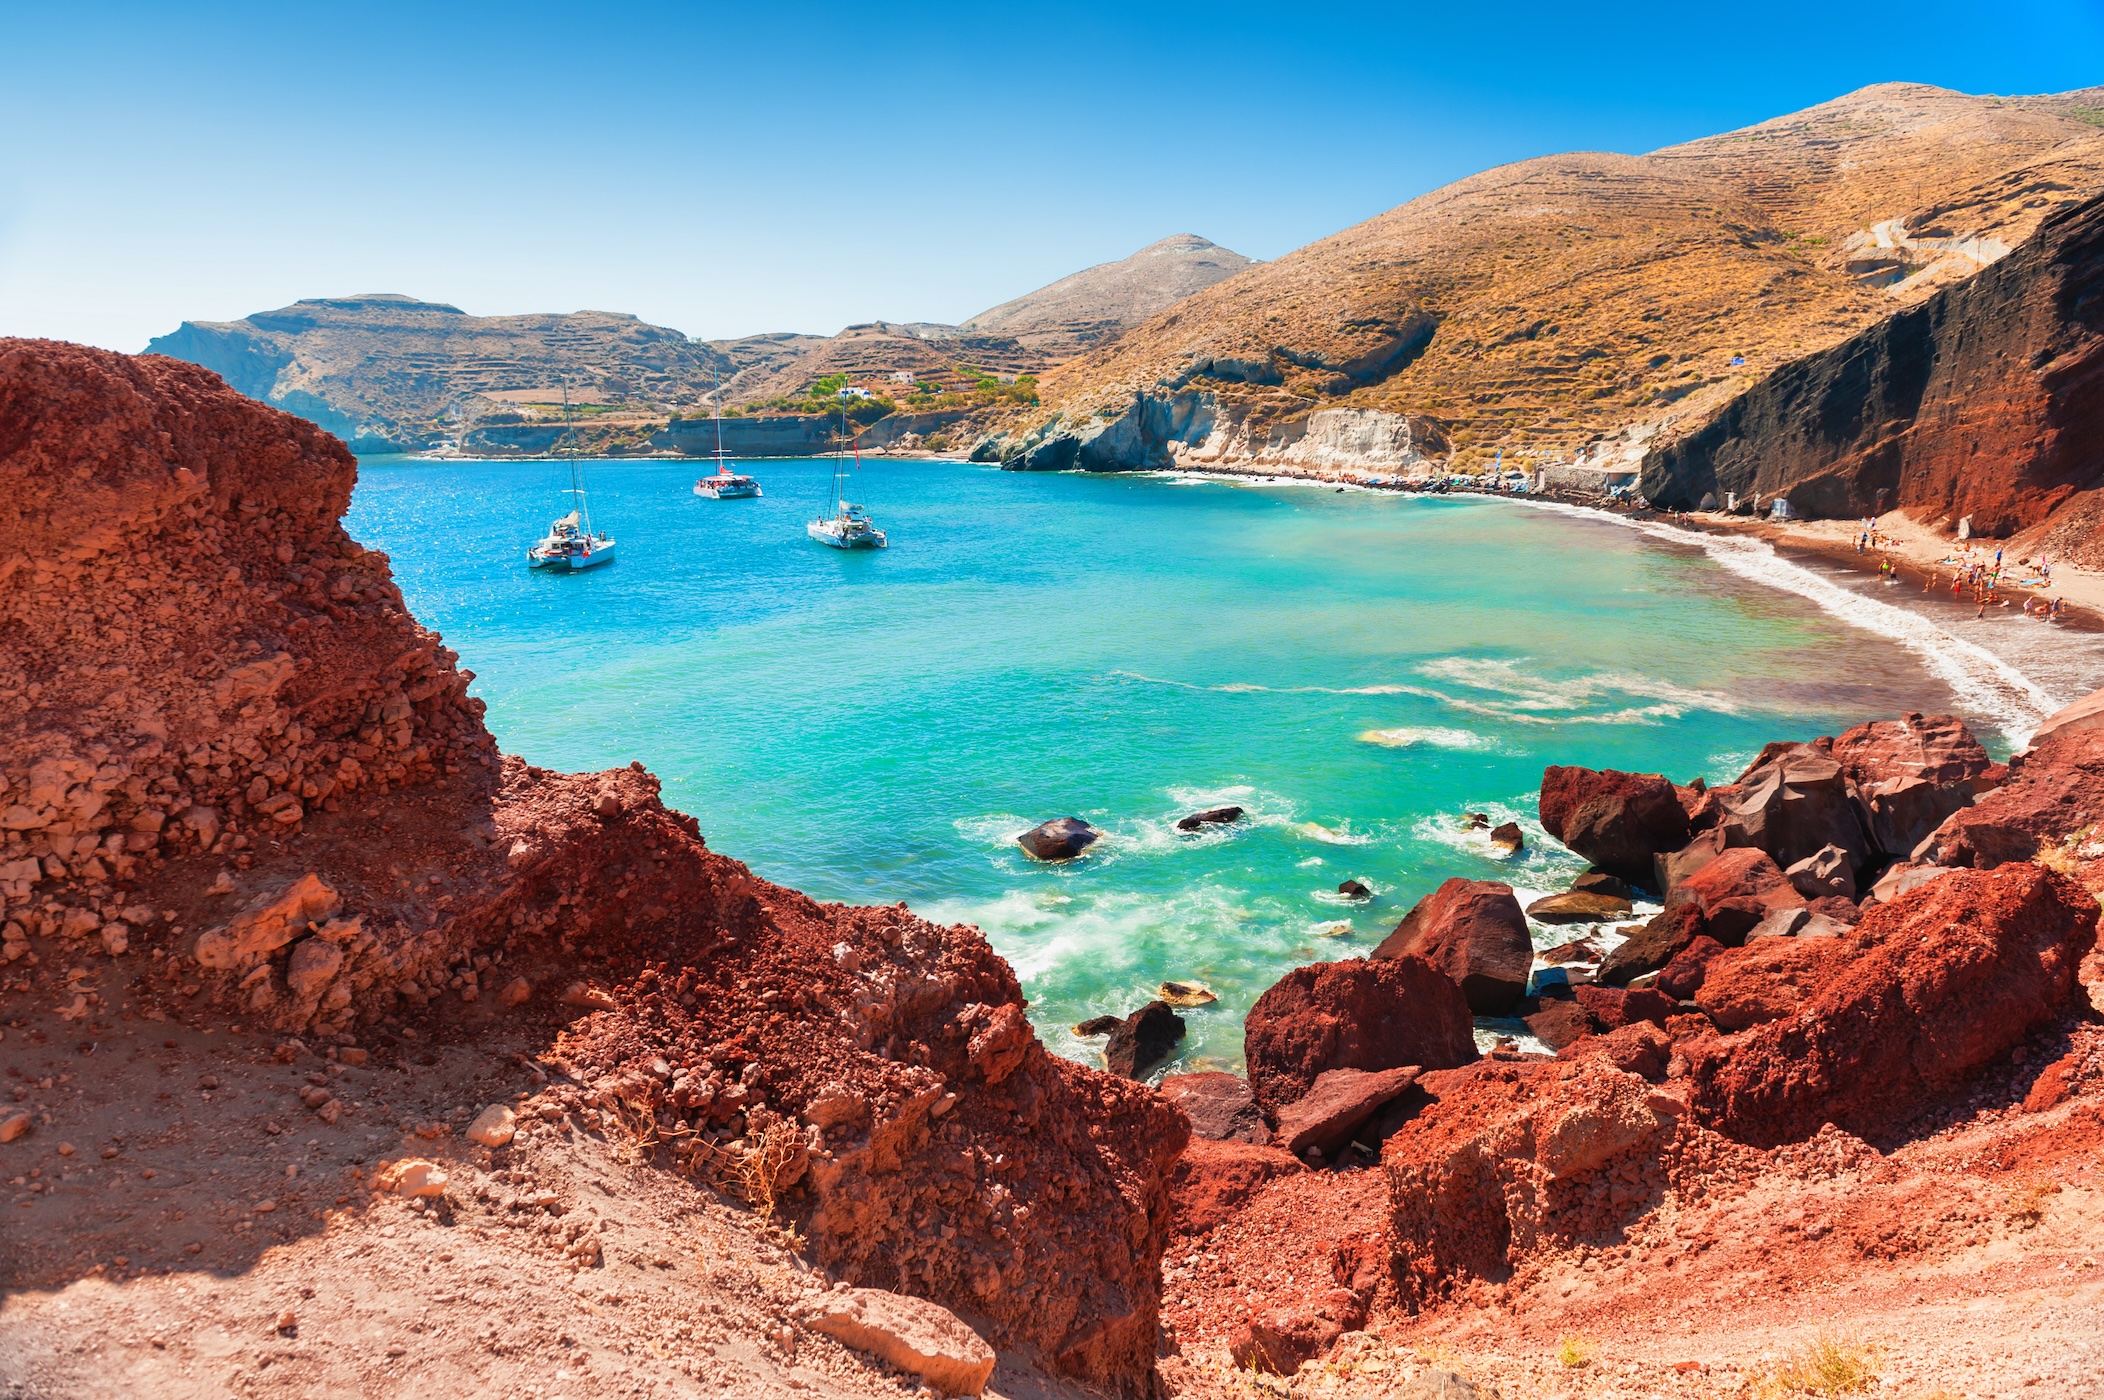 cove with turquoise water and red cliffs